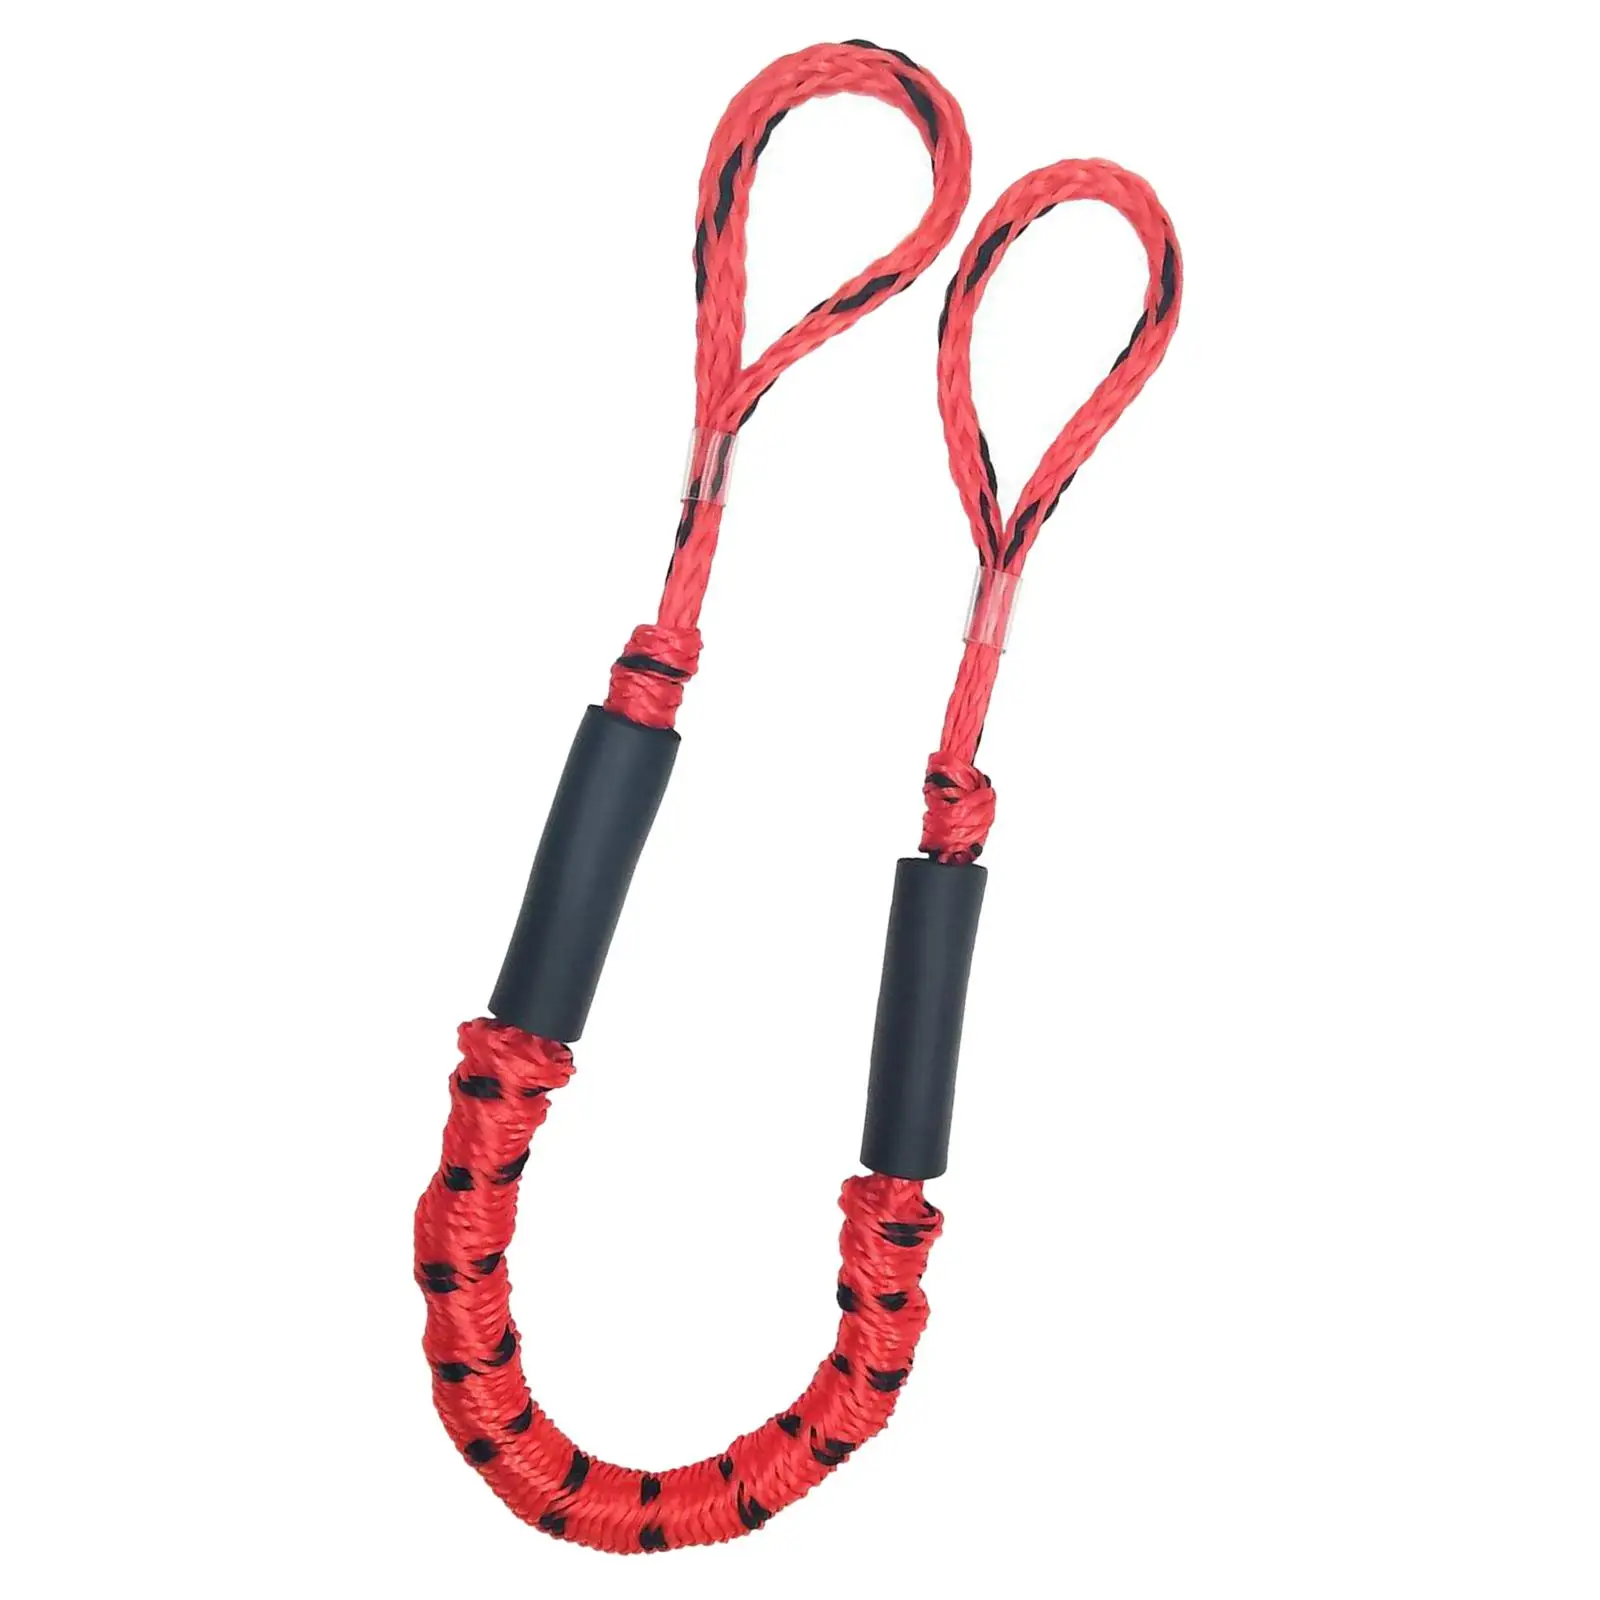 4 Feet Boat  & Stretchable Mooring Rope Dock Ties  Cord Boat